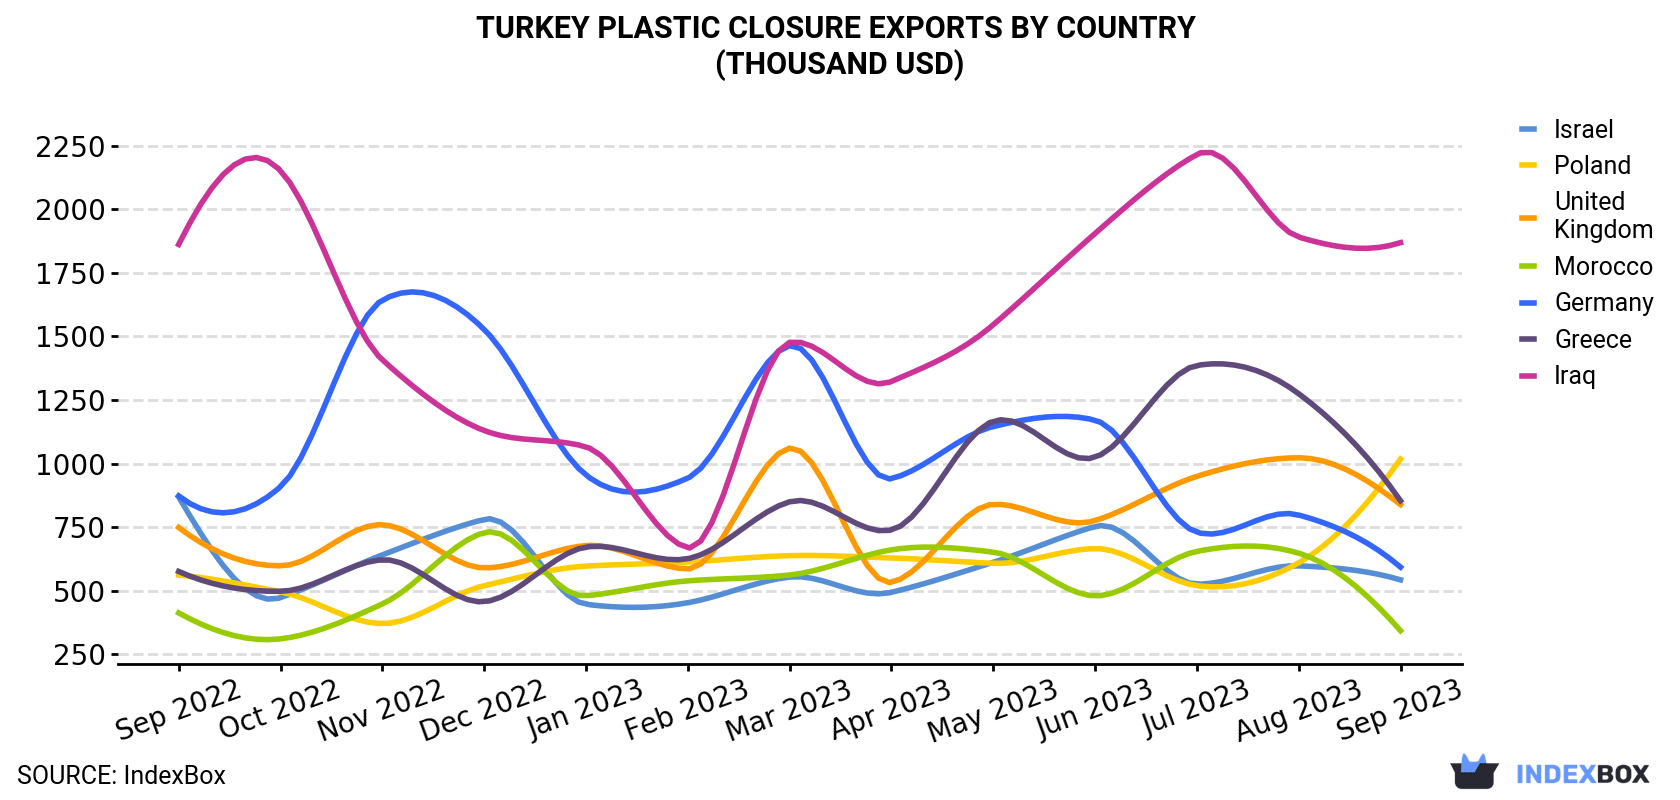 Turkey Plastic Closure Exports By Country (Thousand USD)